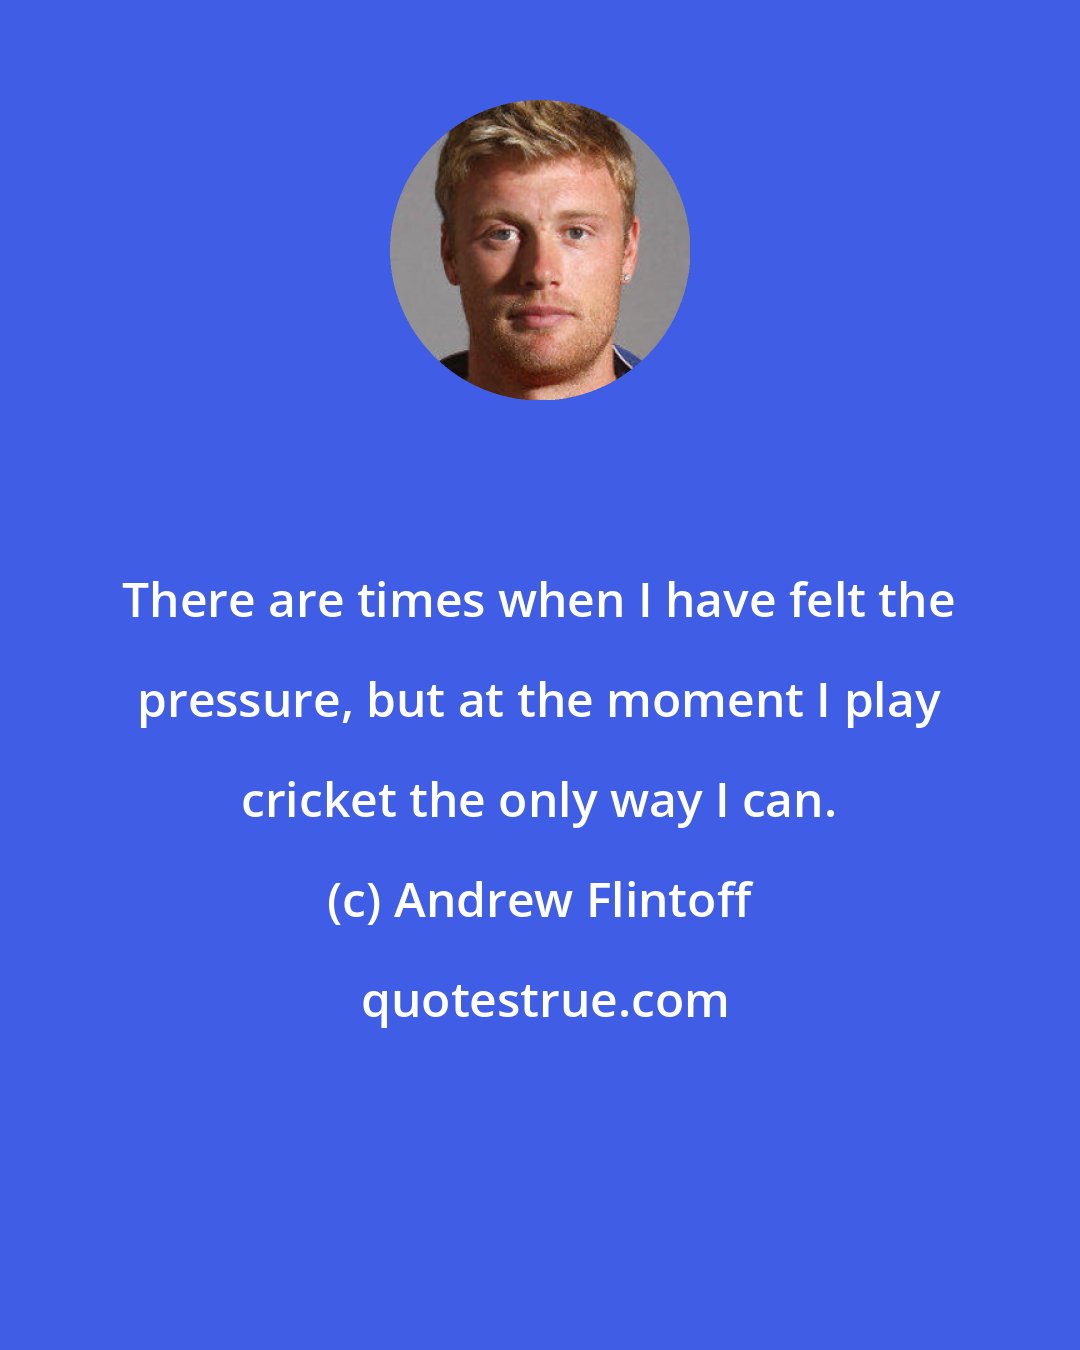 Andrew Flintoff: There are times when I have felt the pressure, but at the moment I play cricket the only way I can.